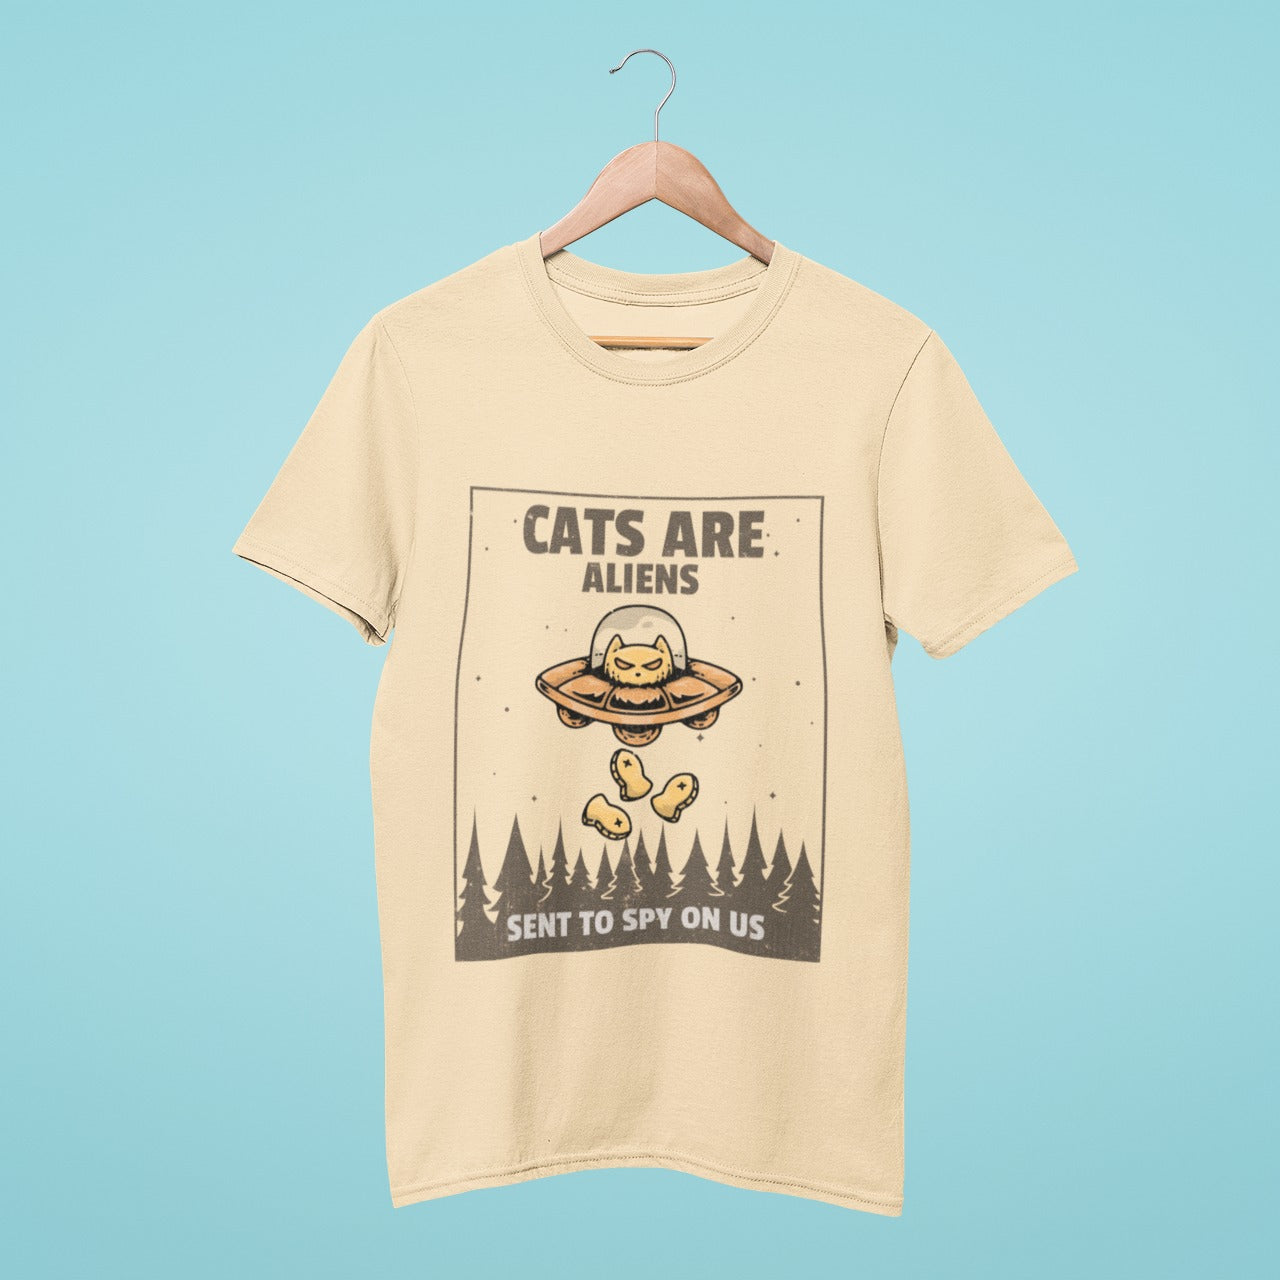 Add some quirky charm to your wardrobe with our beige t-shirt featuring a cute cat in a UFO with the slogan "Cats are aliens sent to spy on us". Perfect for cat lovers and anyone who loves unique, playful fashion. Made from high-quality materials, this comfortable and durable t-shirt is a must-have. Order now and let the conversation begin!